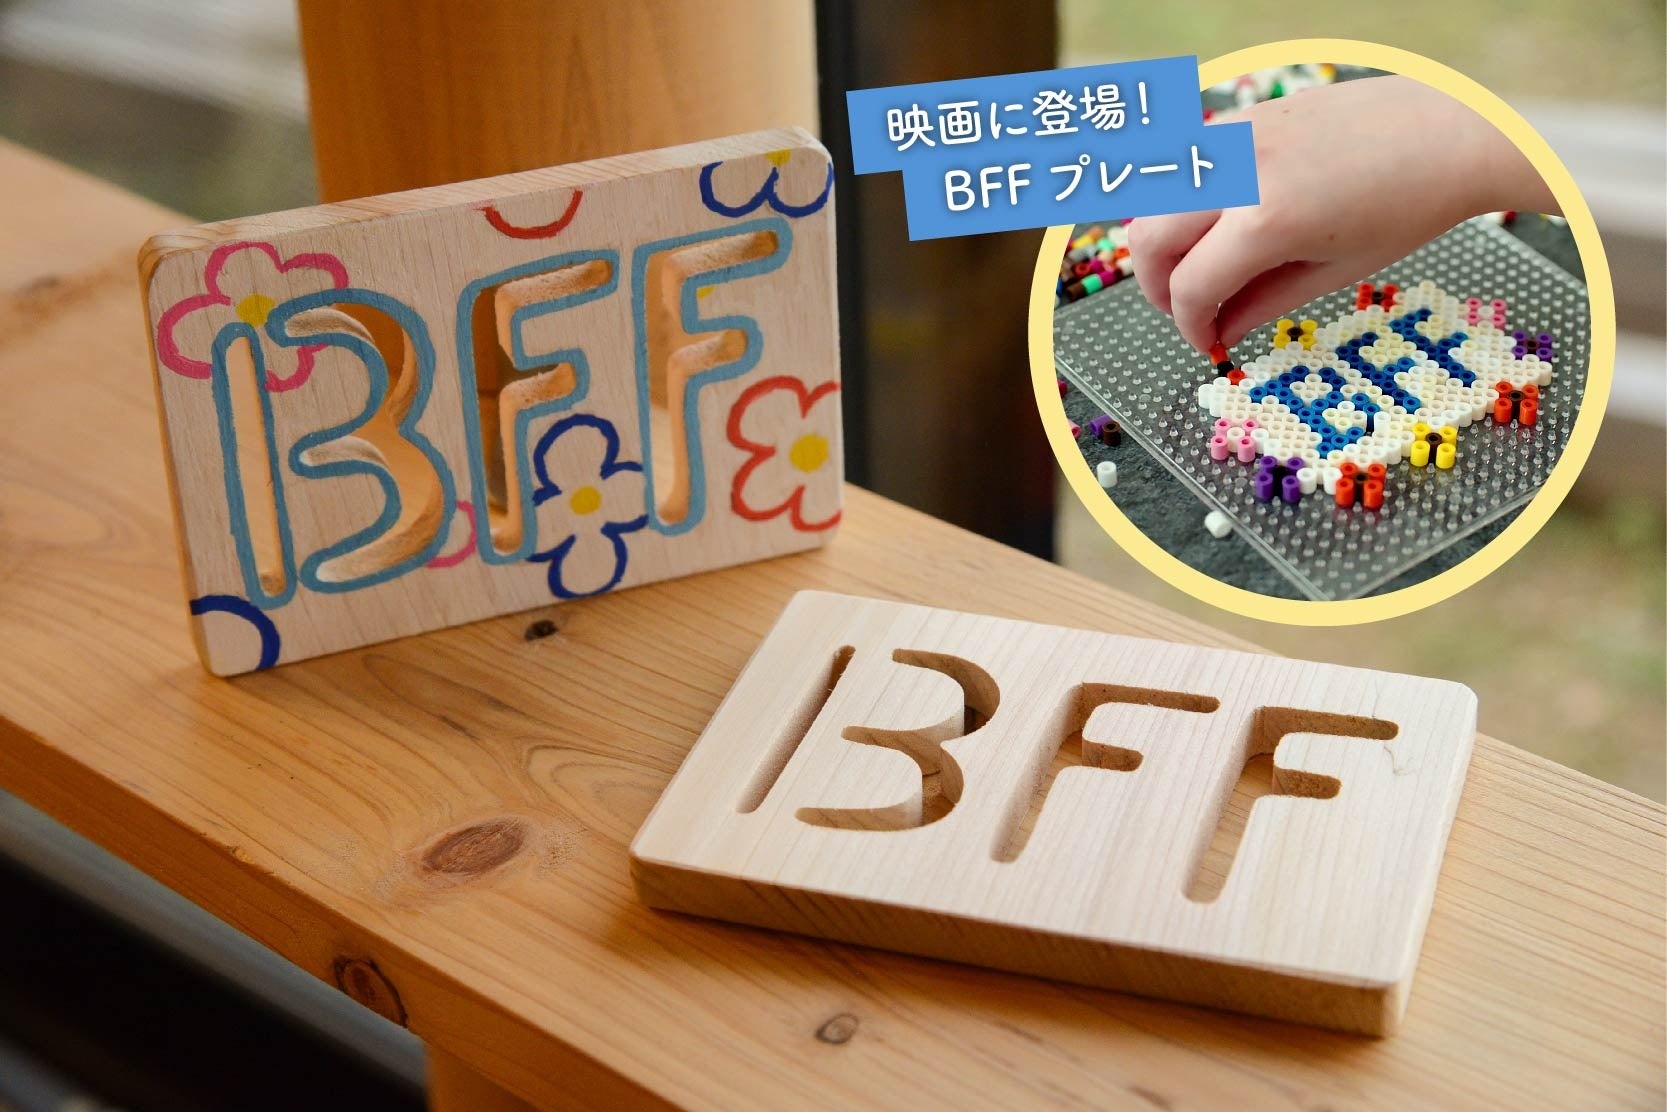 XEF[ffwgEGbx~bc@rbW@FɉԂY"BFF(Best Friend Forever)Ly[h